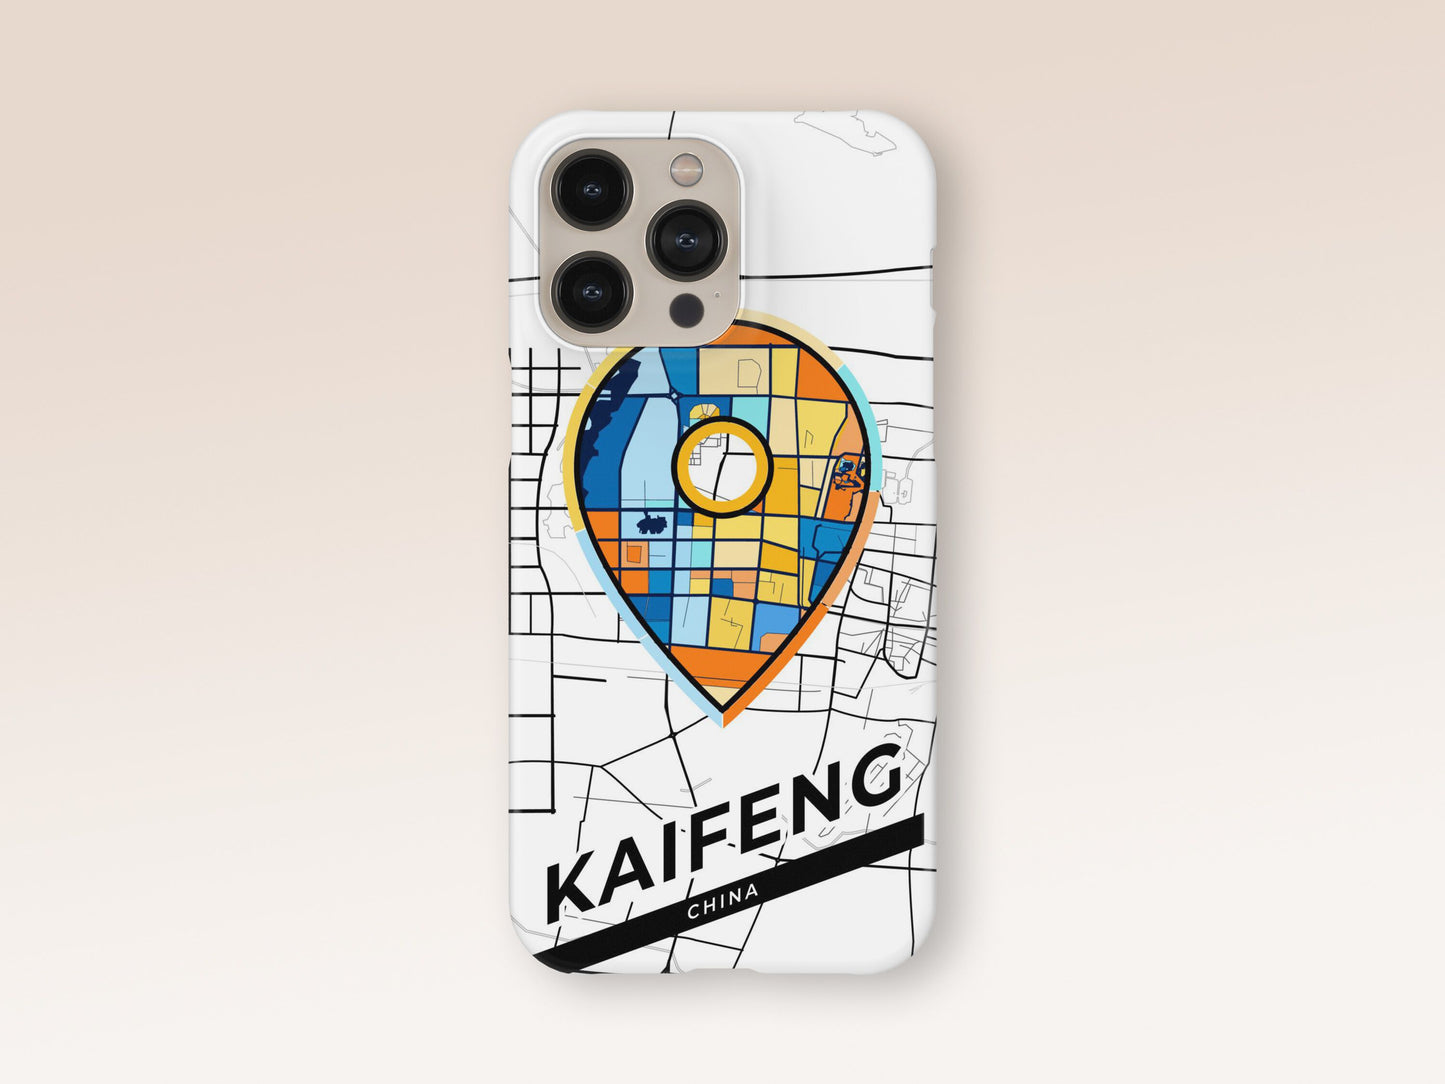 Kaifeng China slim phone case with colorful icon. Birthday, wedding or housewarming gift. Couple match cases. 1